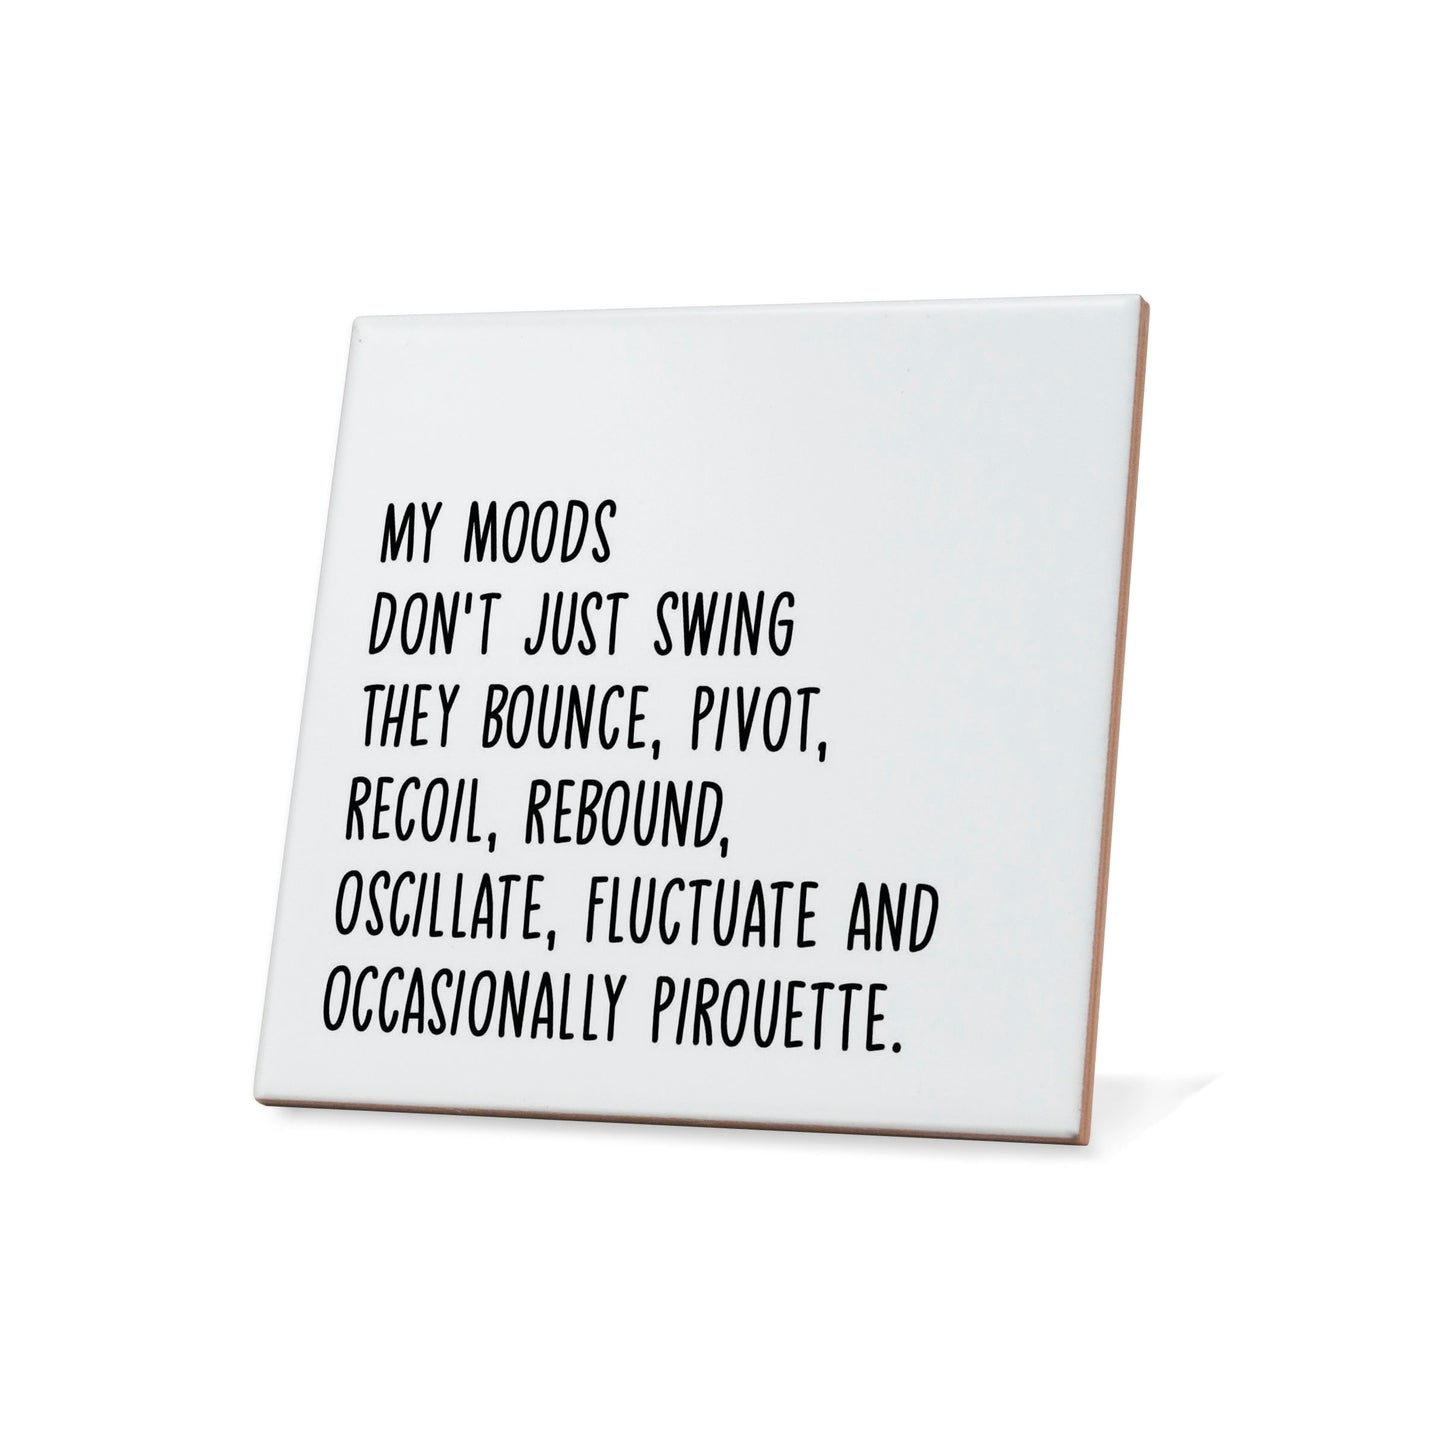 My moods don't just swing they bounce, ... Quote Coaster